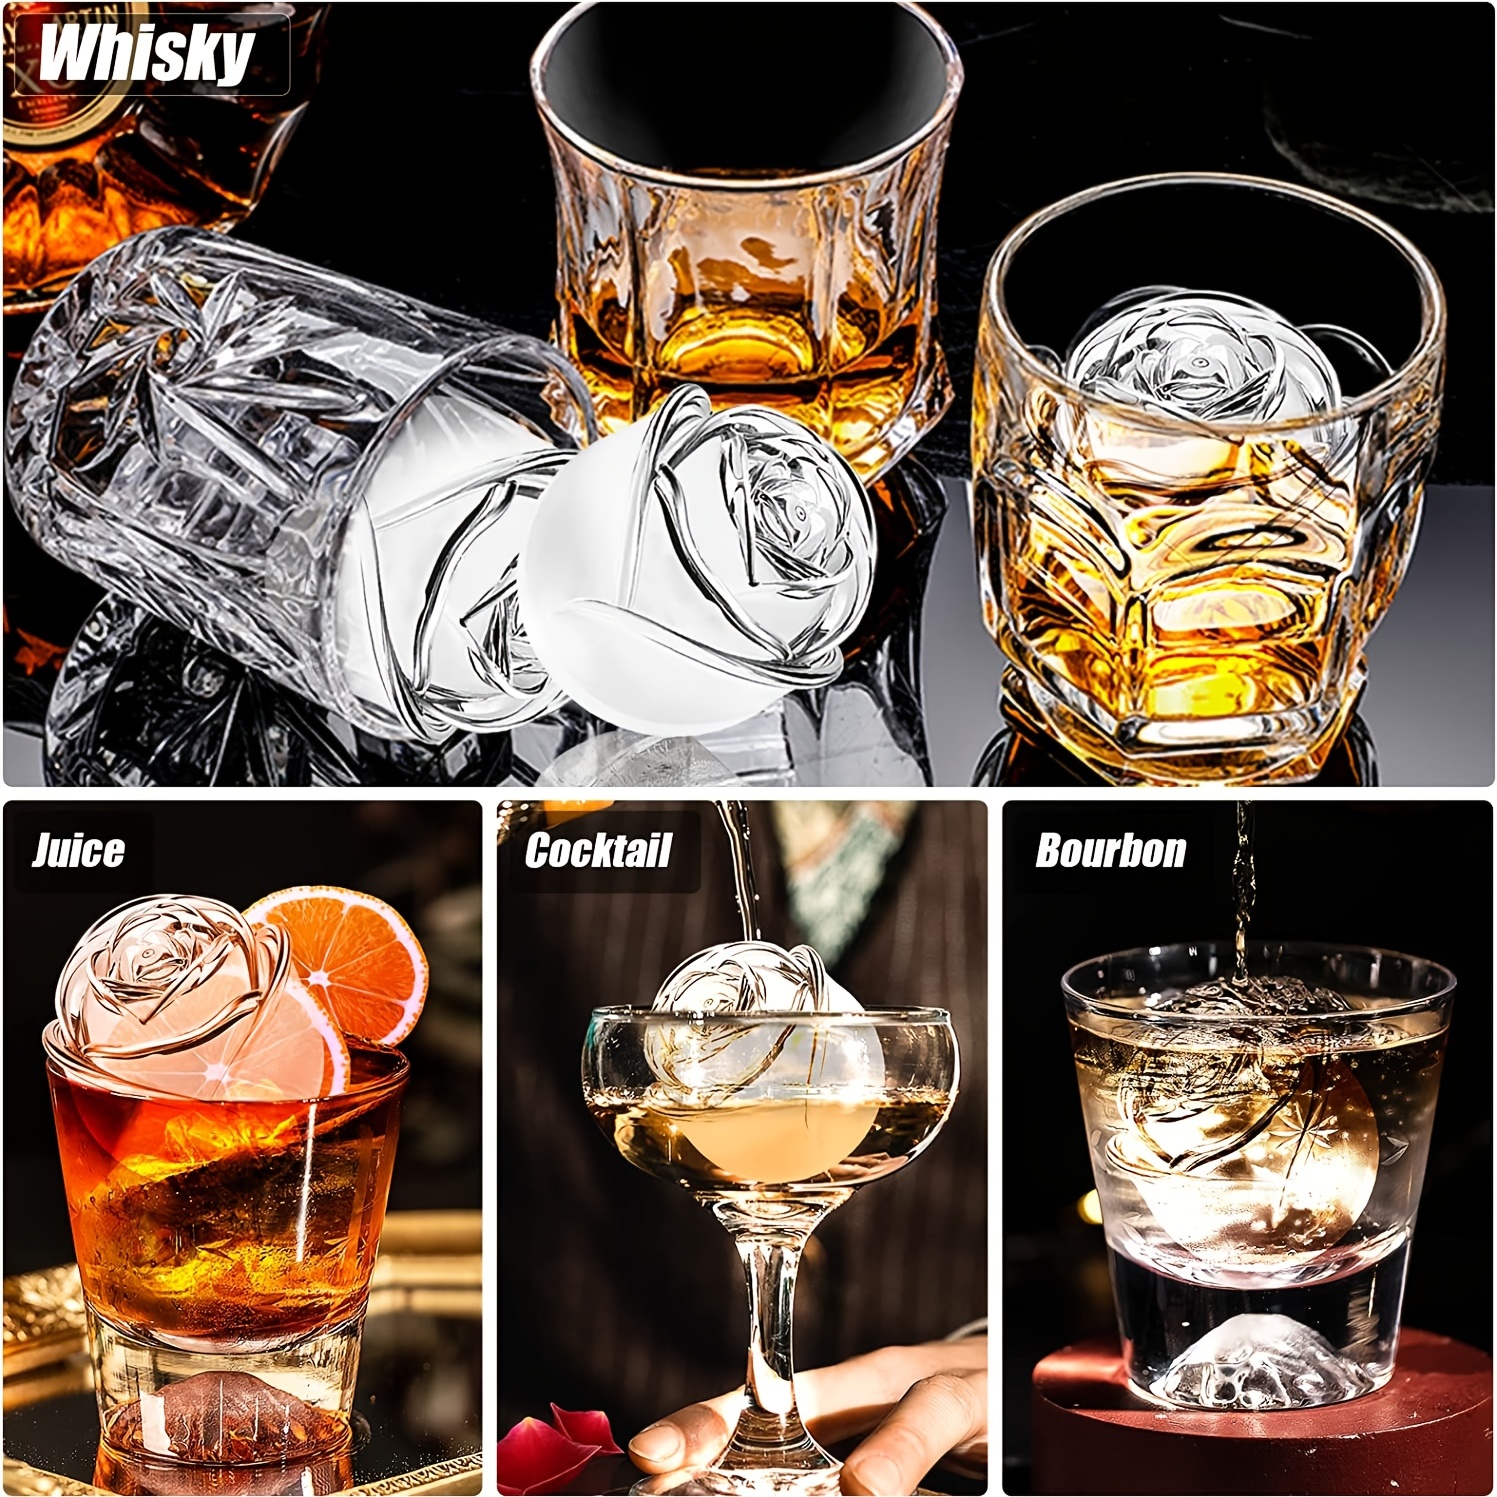 Whiskey Glass & Ice Mold